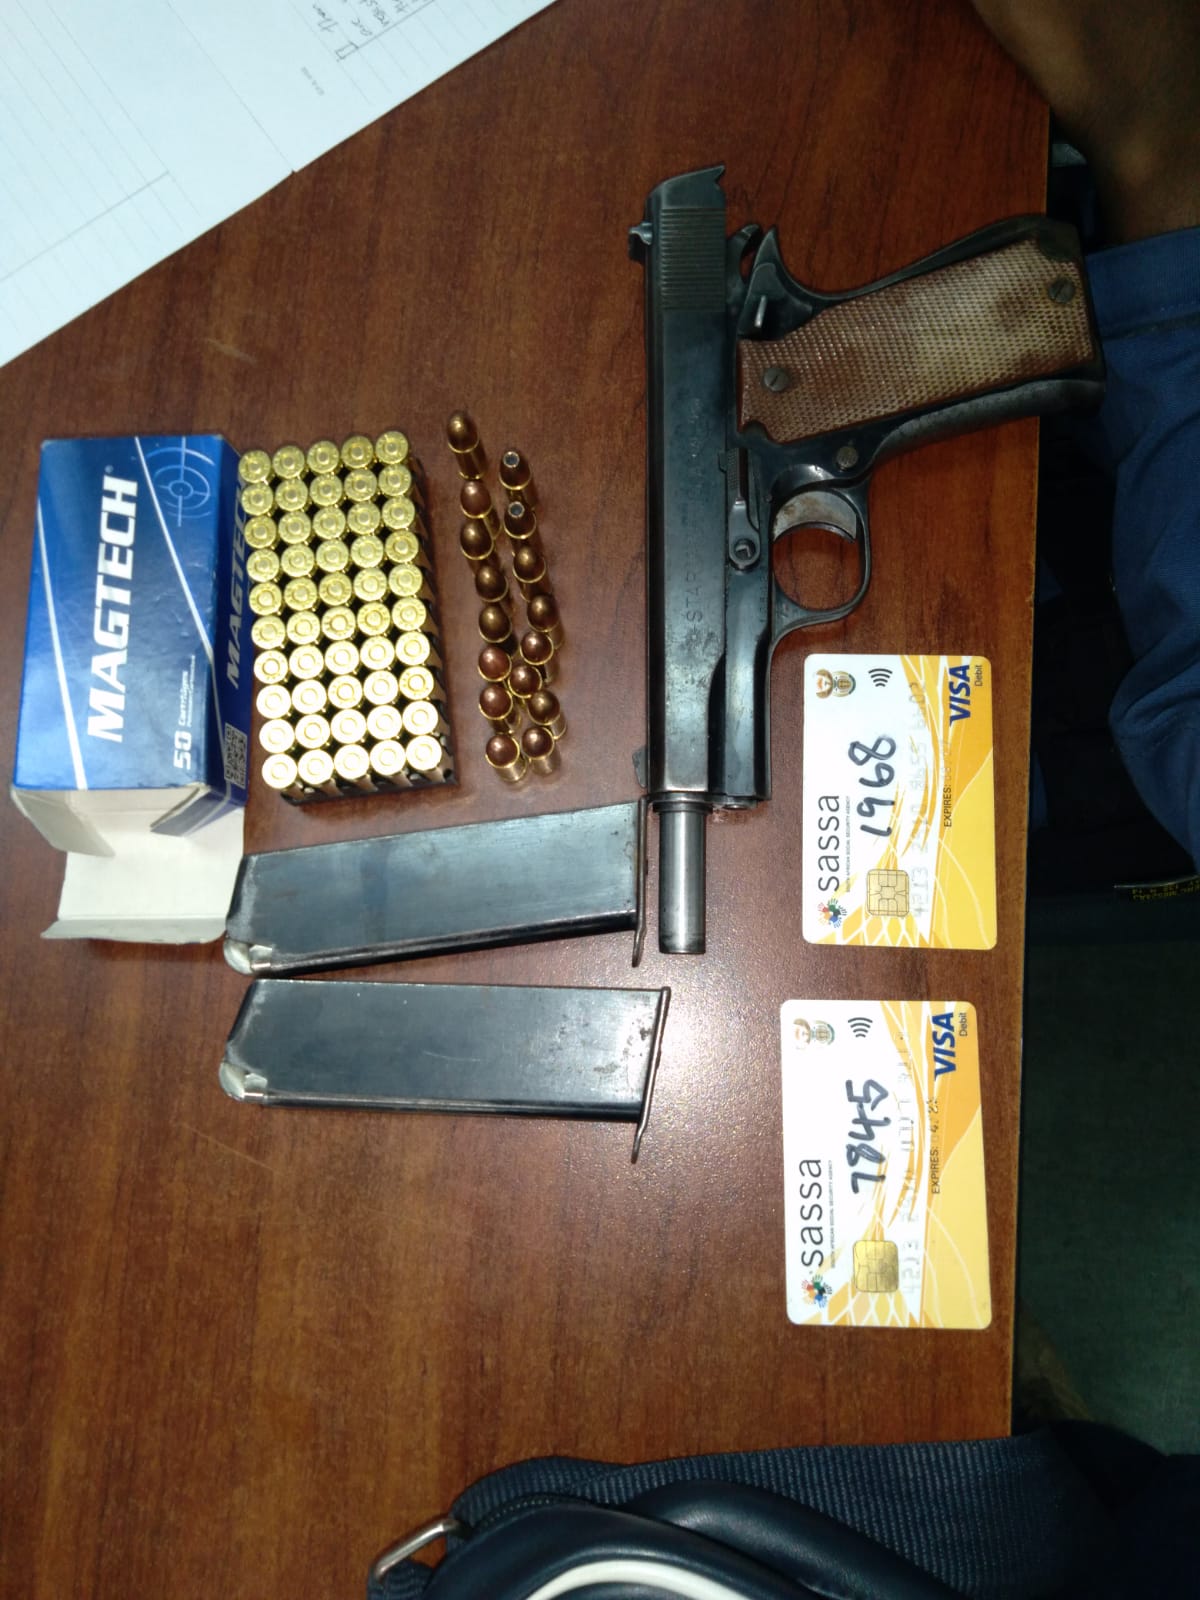 Three men nabbed with firearms and SASSA cards remanded in custody